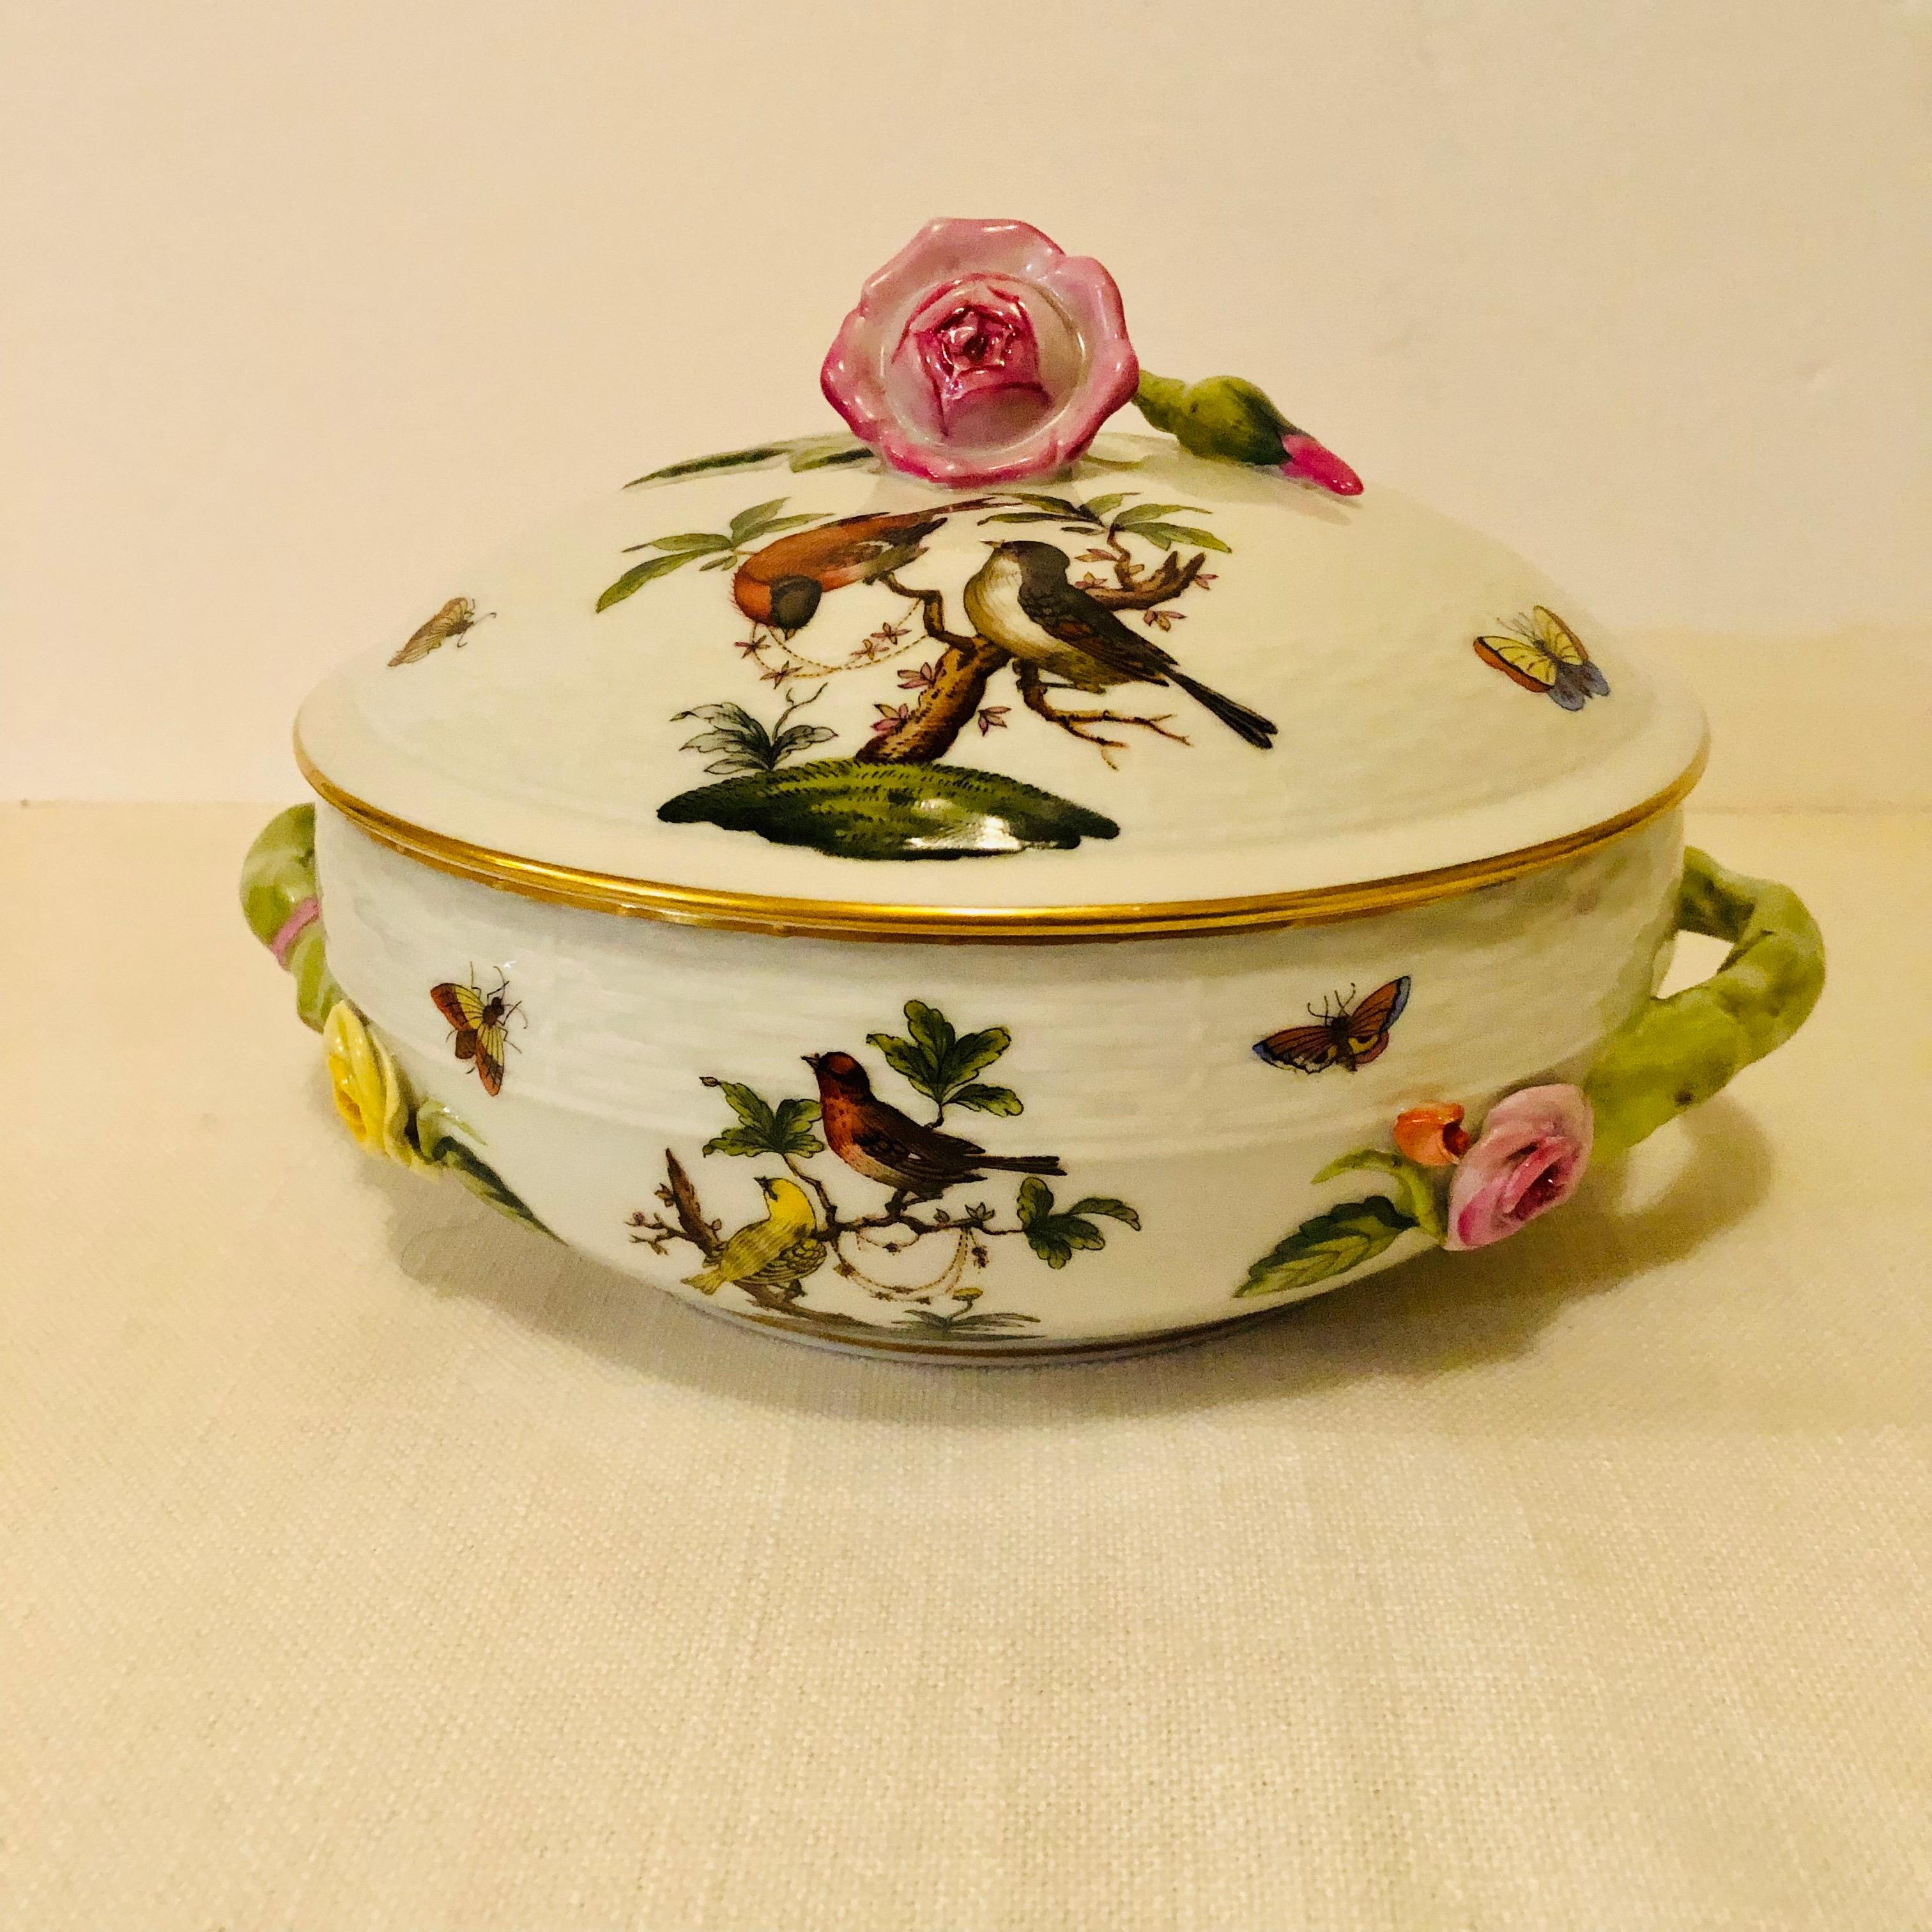 Herend Rothschild Bird Covered Bowl with Raised Pink Rose and Rose Bud on Cover 1